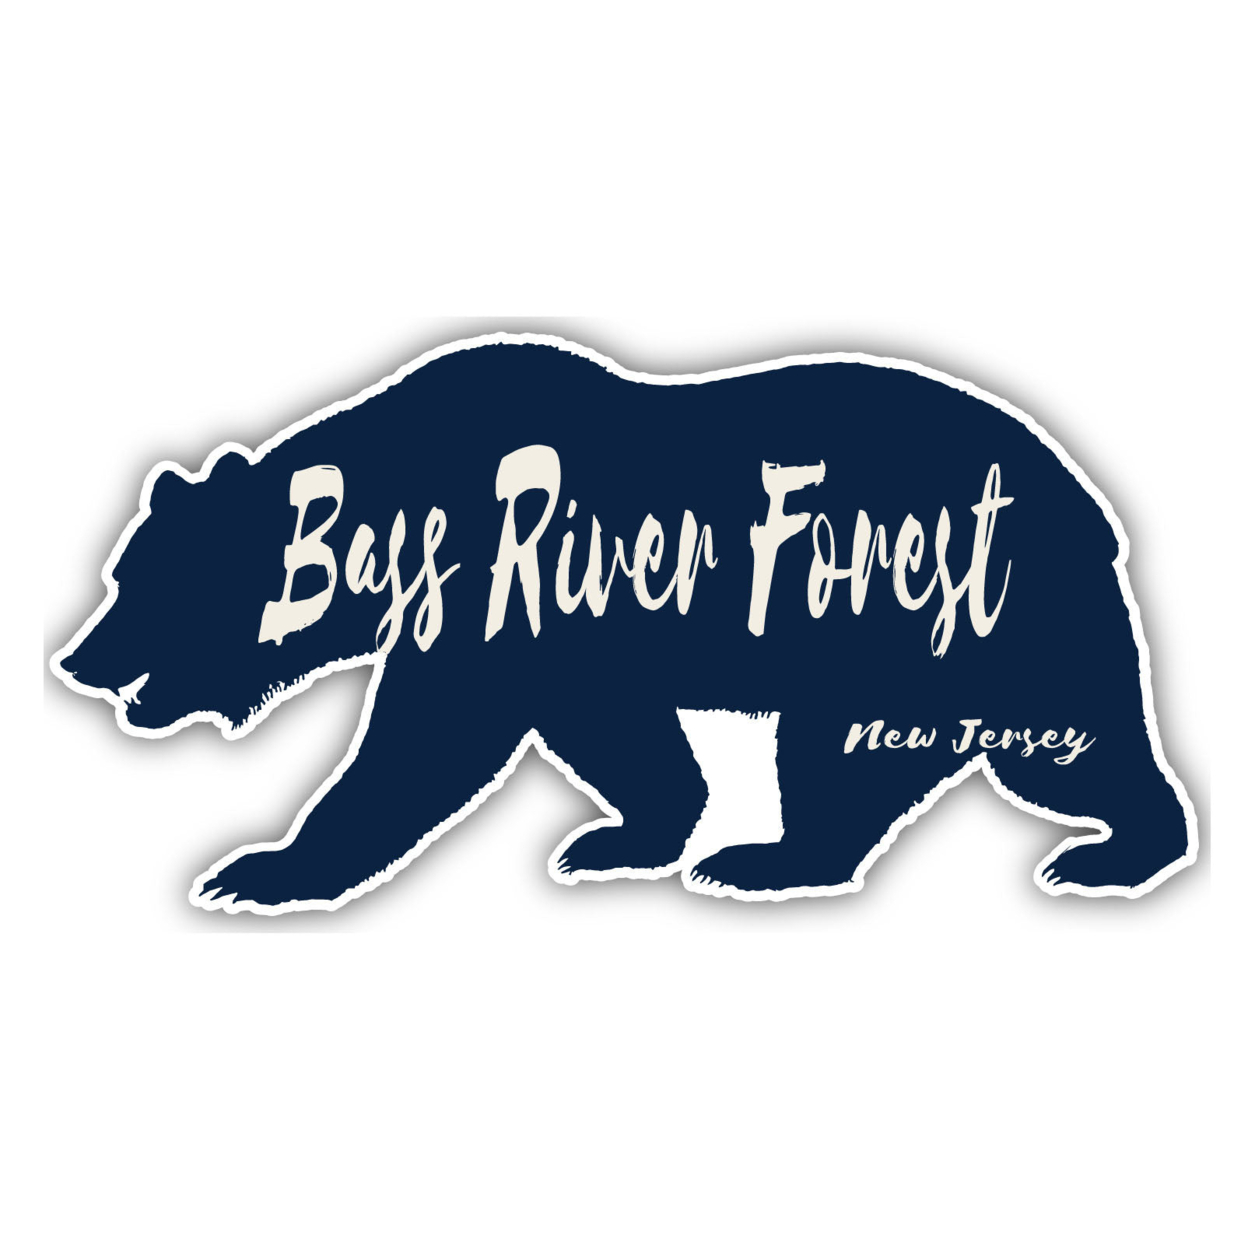 Bass River Forest New Jersey Souvenir Decorative Stickers (Choose Theme And Size) - 4-Pack, 8-Inch, Bear